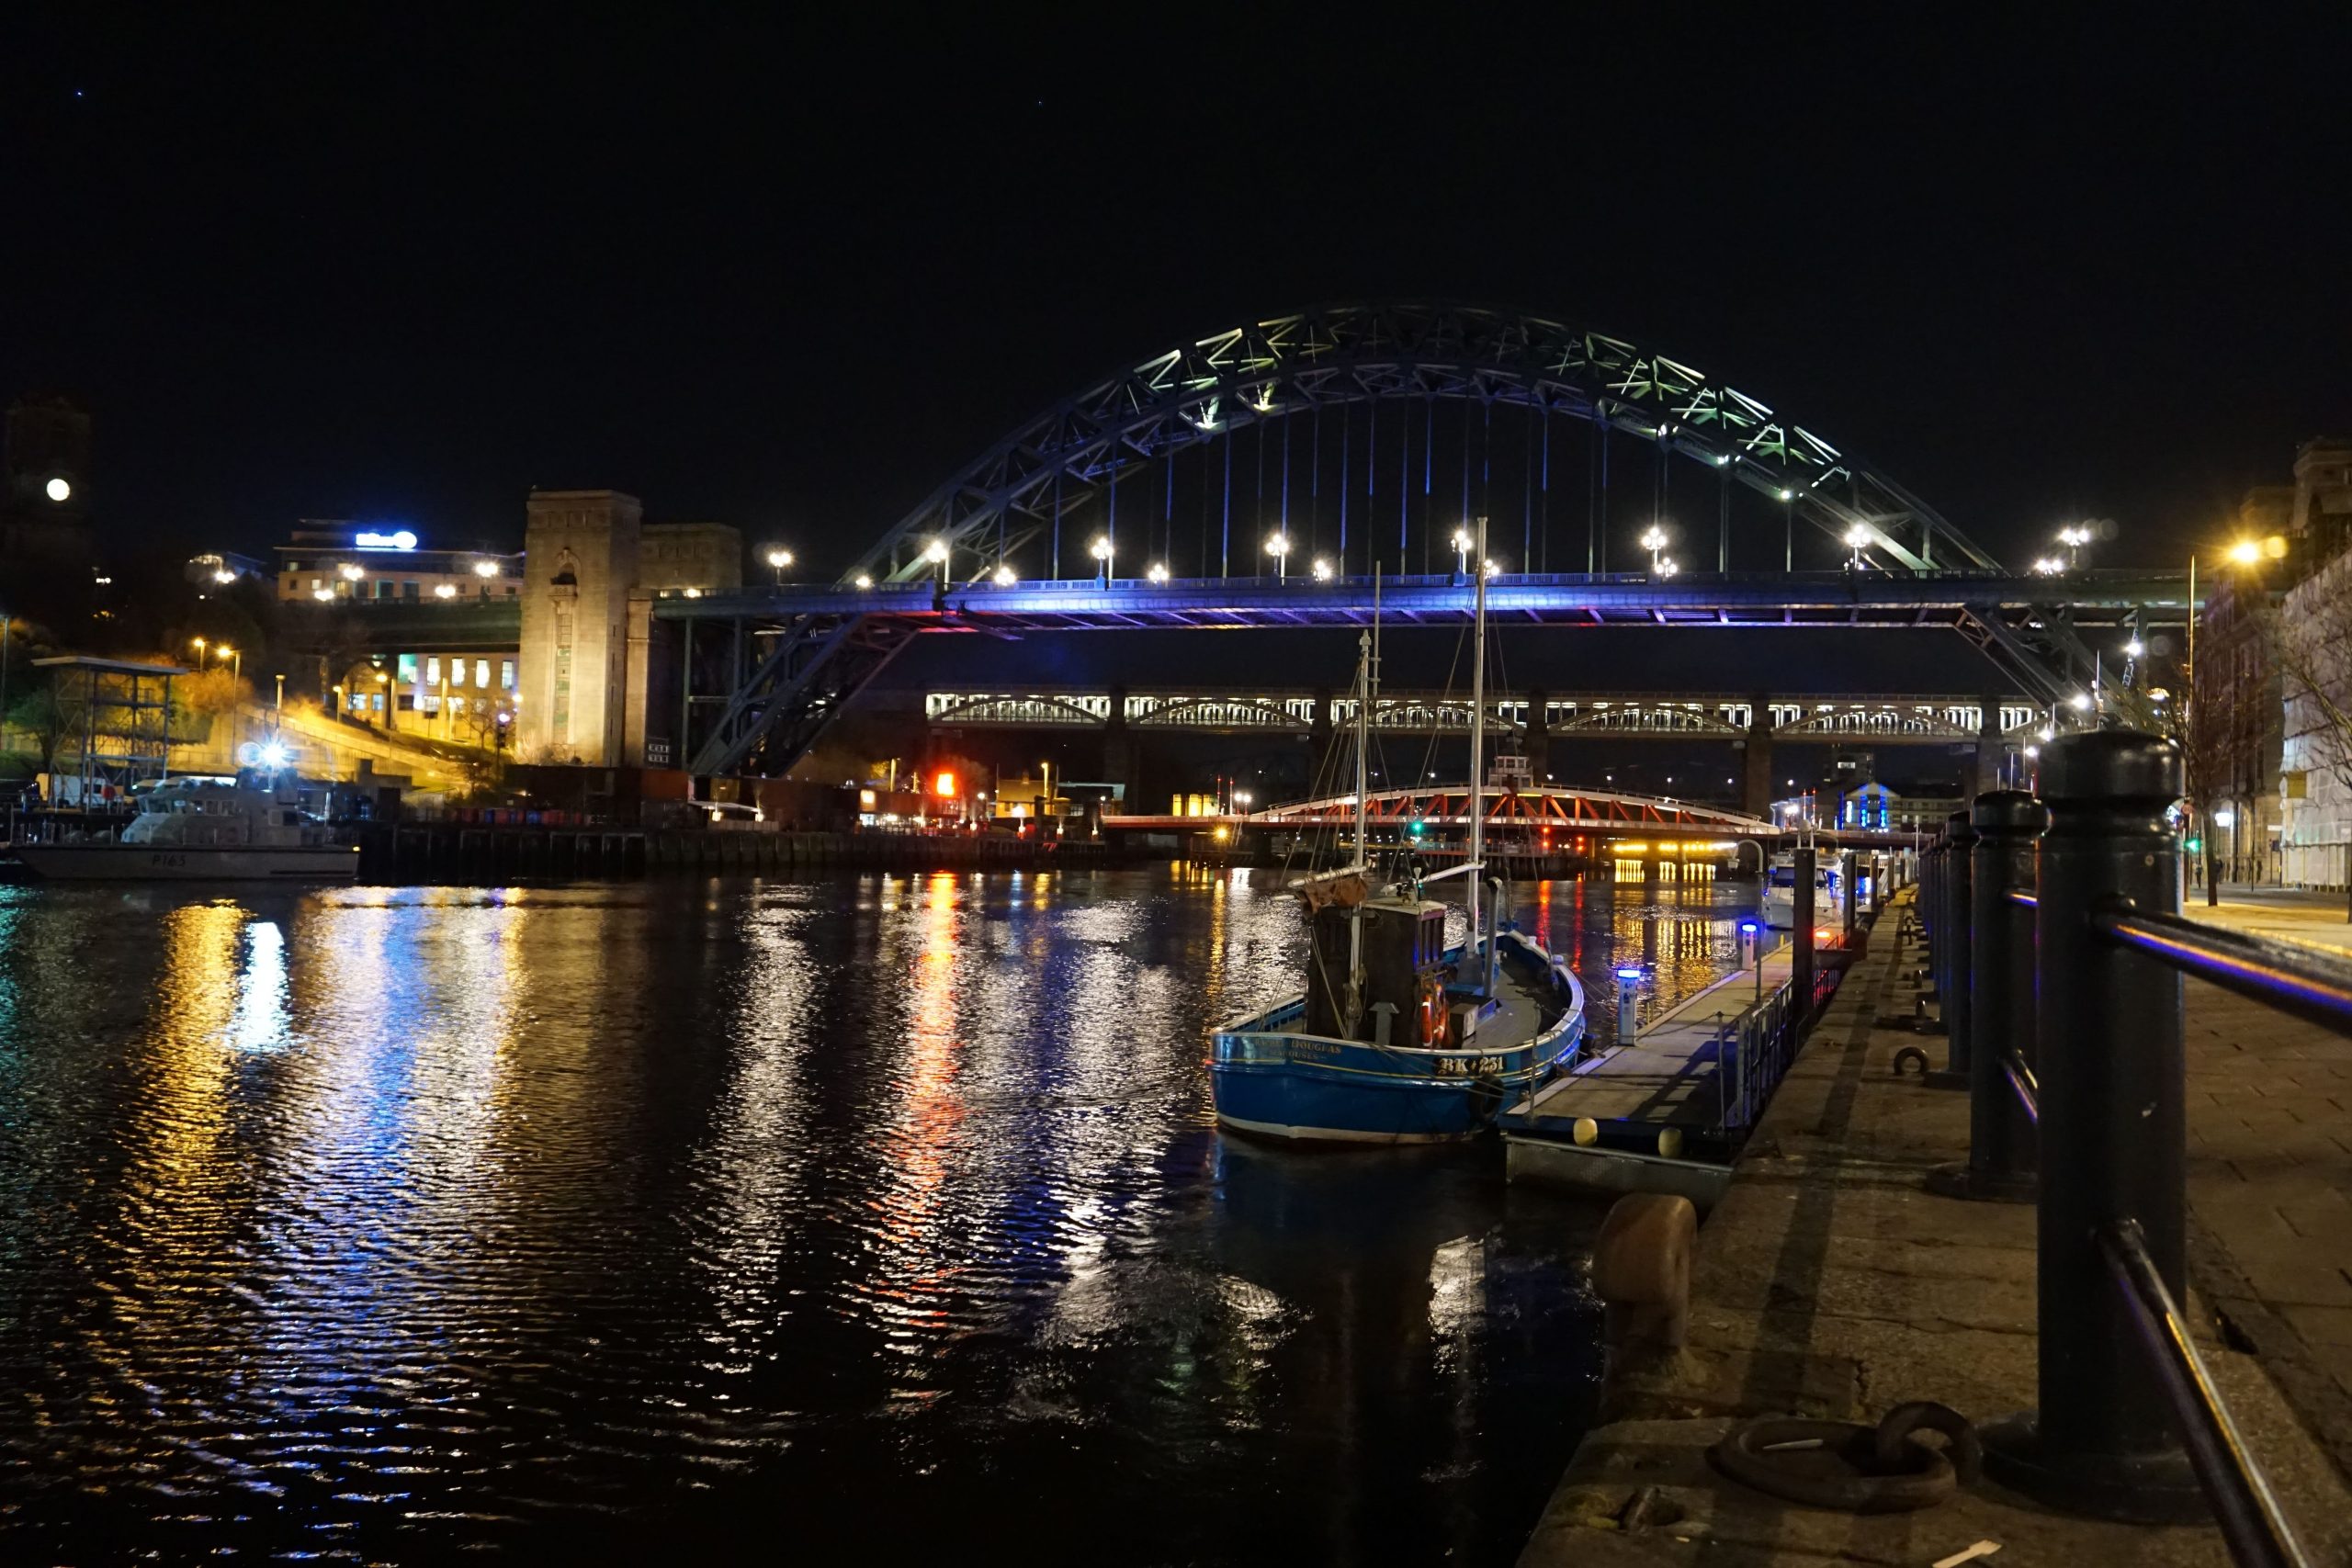 A small boat is moored in the River Tyne at night, the background has the Tyne Bridge. Lights are reflected in the water.